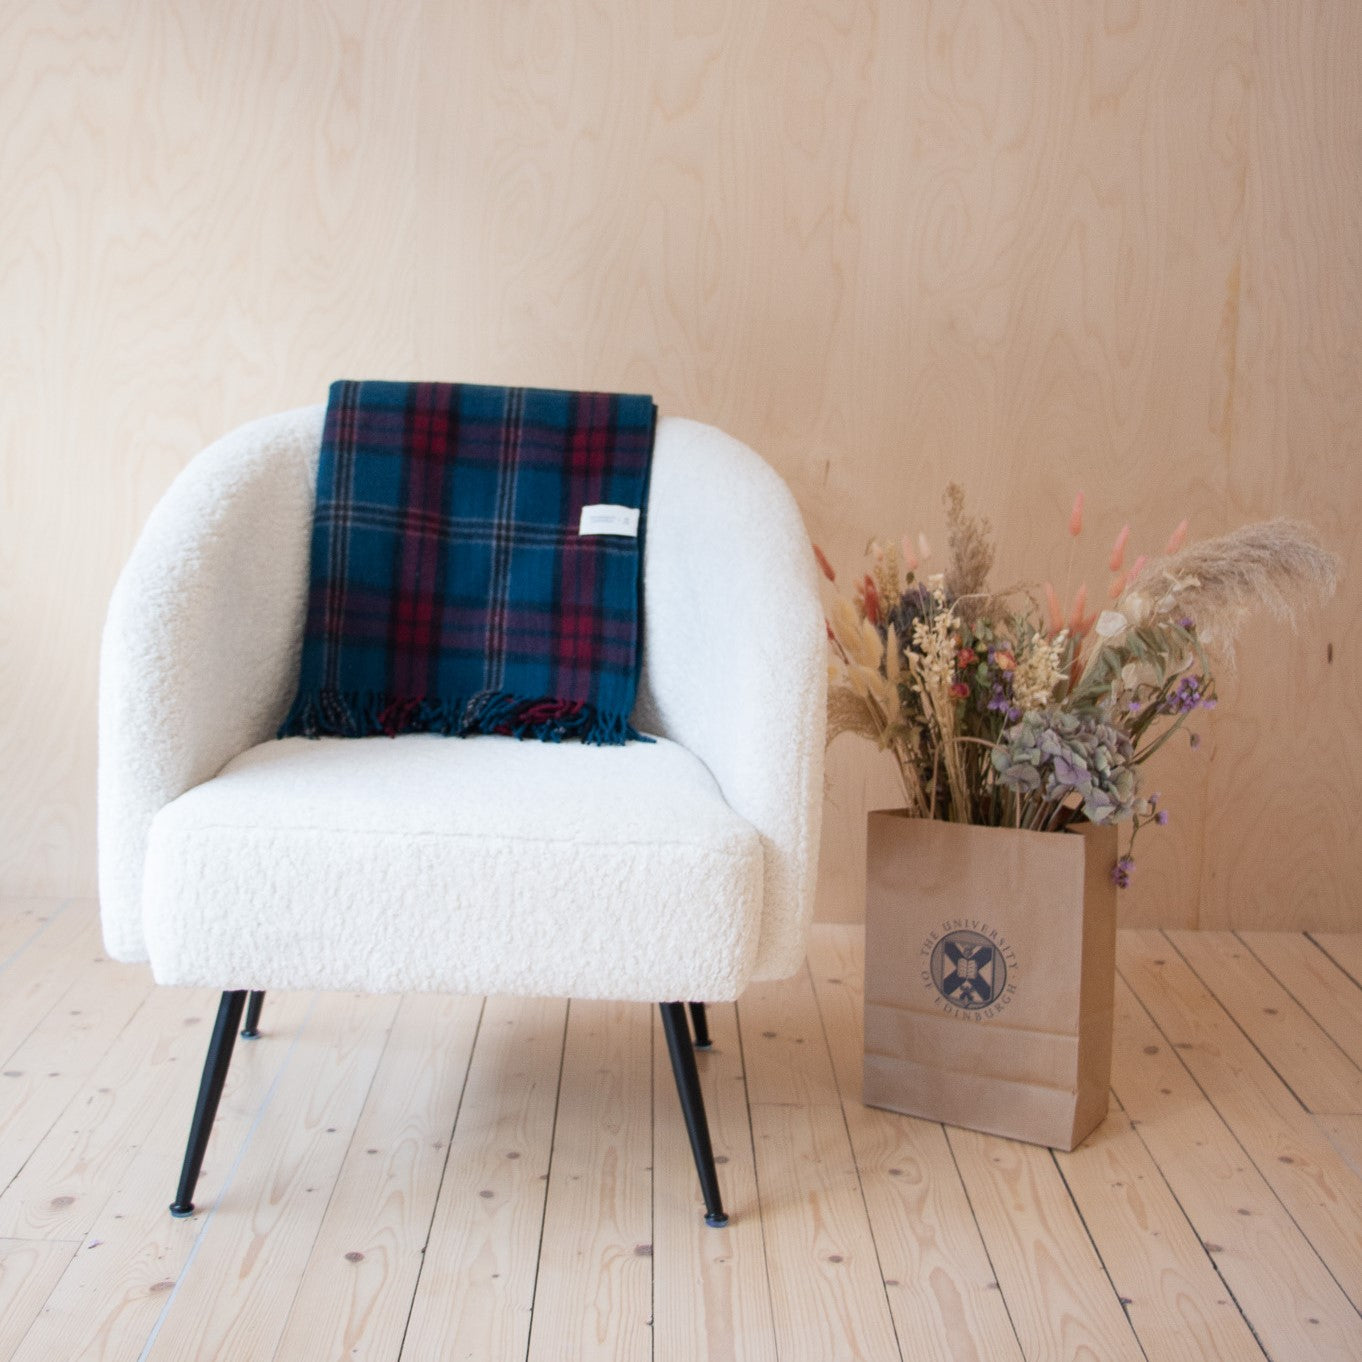 university tartan blanket on white chair, next to paper bag with flower